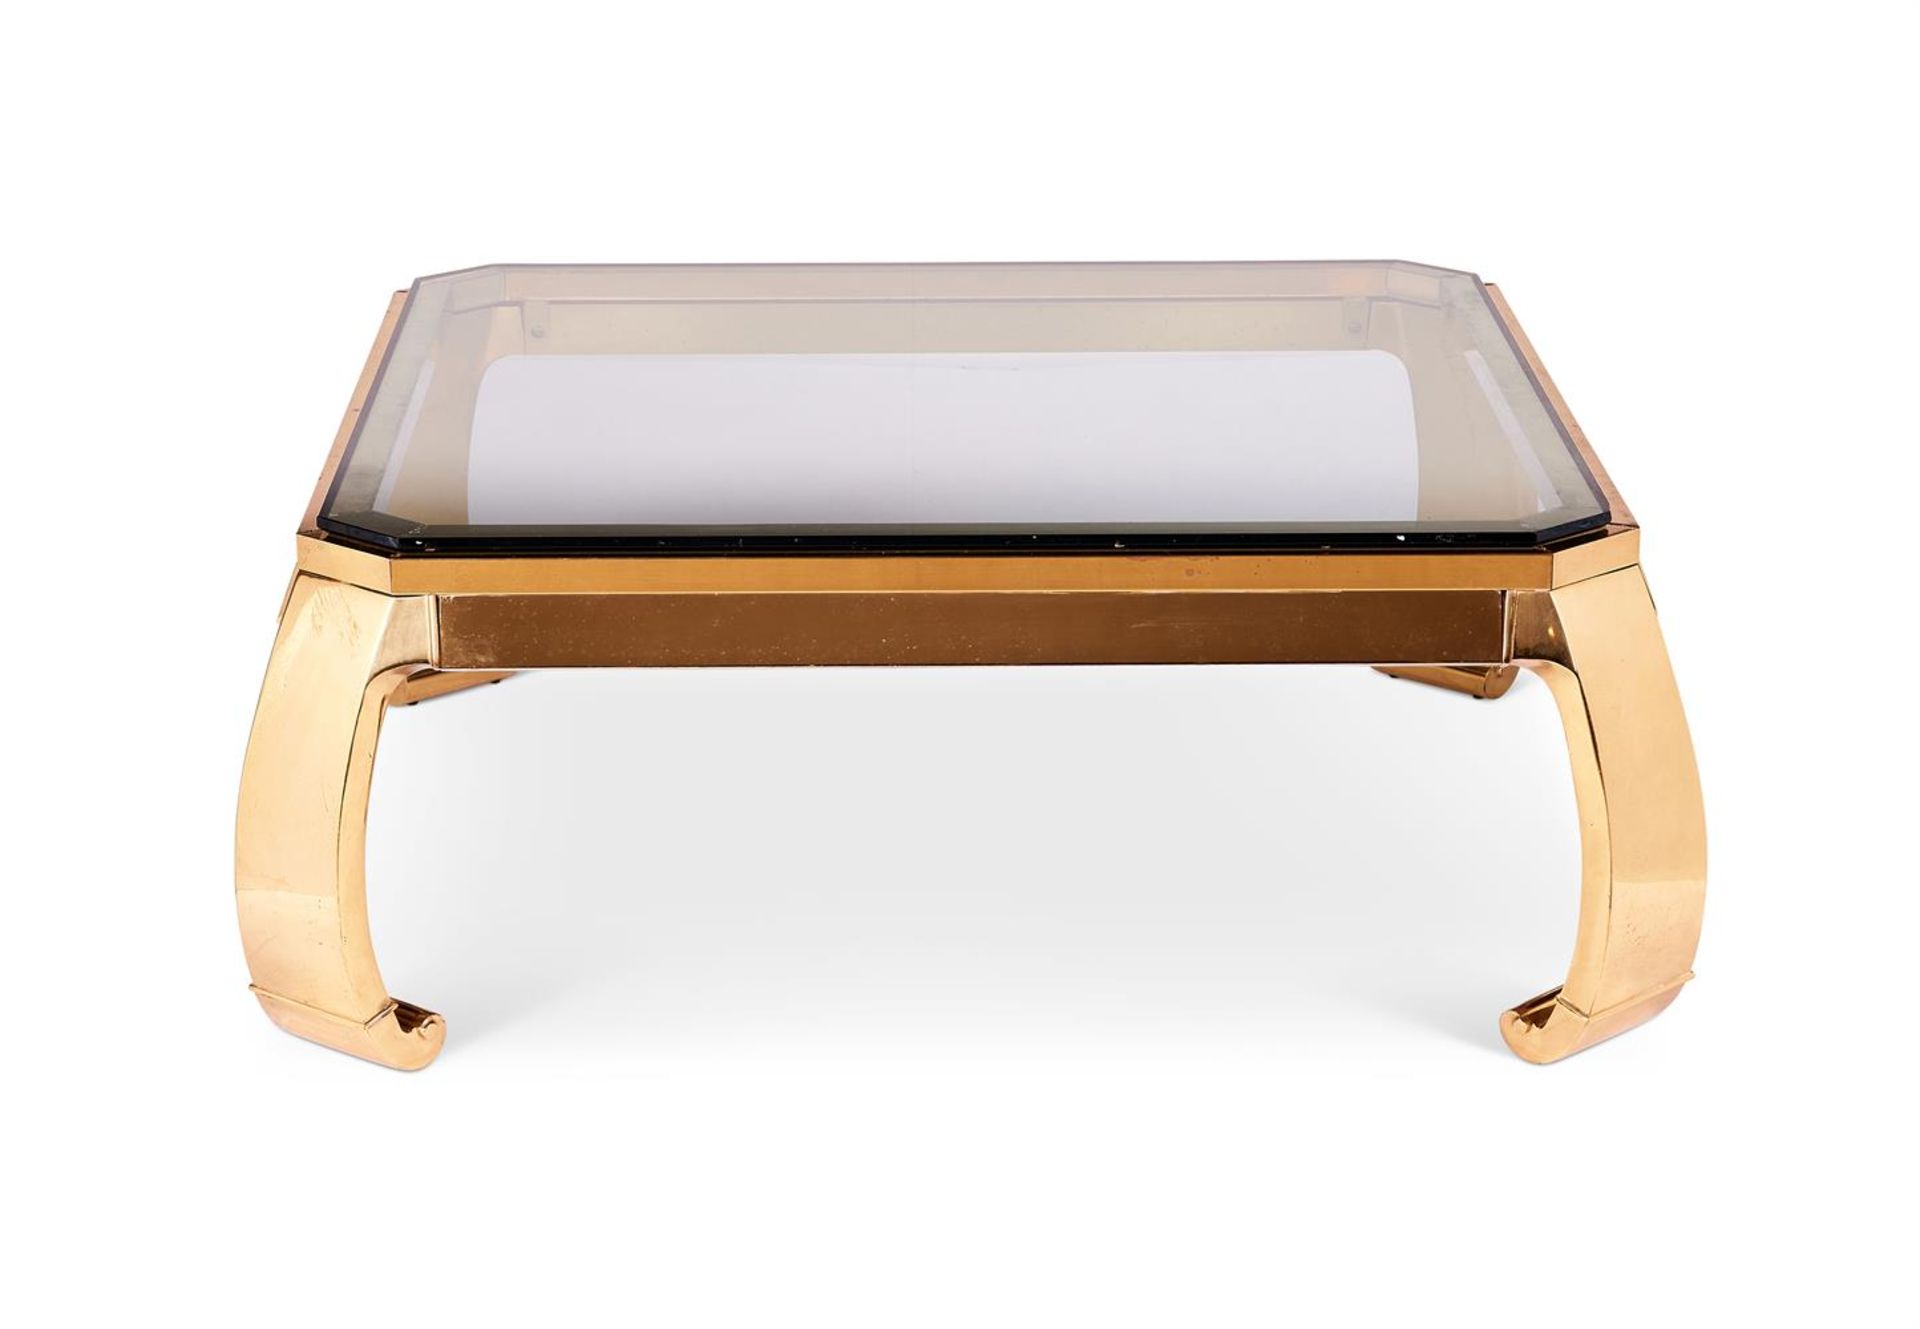 A BRASS COFFEE TABLE DESIGNED BY KARL SPRINGER, CIRCA 1970